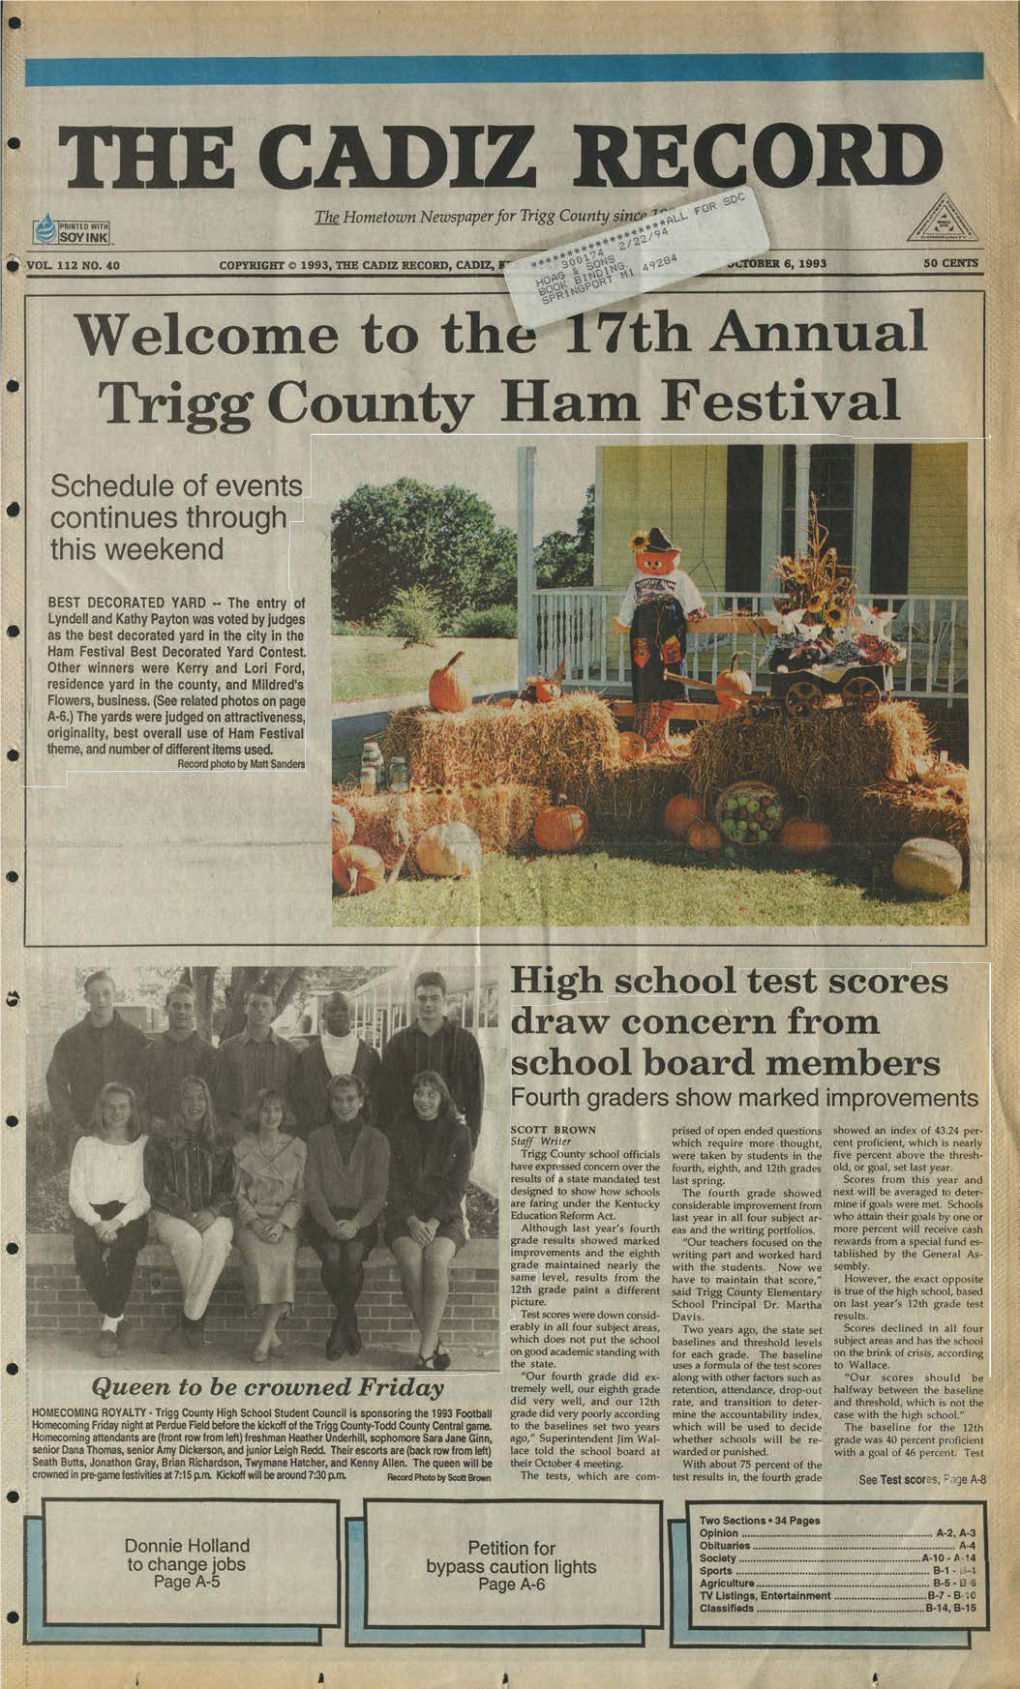 THE CADIZ RECORD $ 0 ° the Hometown Newspaper for Trigg County Since PRINTED with SOY in K T / R T VOL